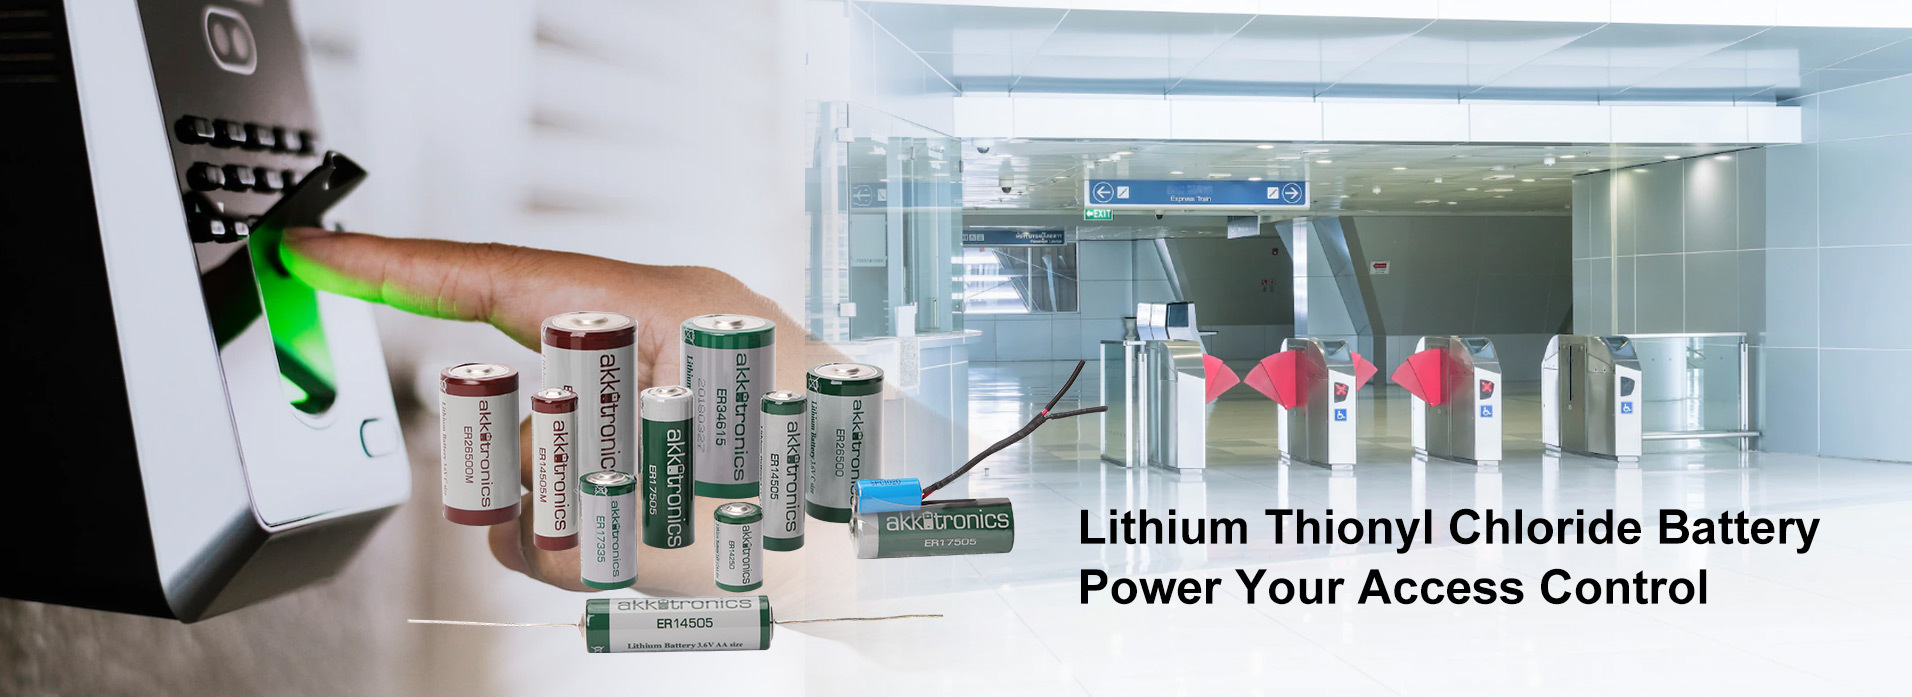 Lithium Thionyl Chloride Battery Power Your Access Control